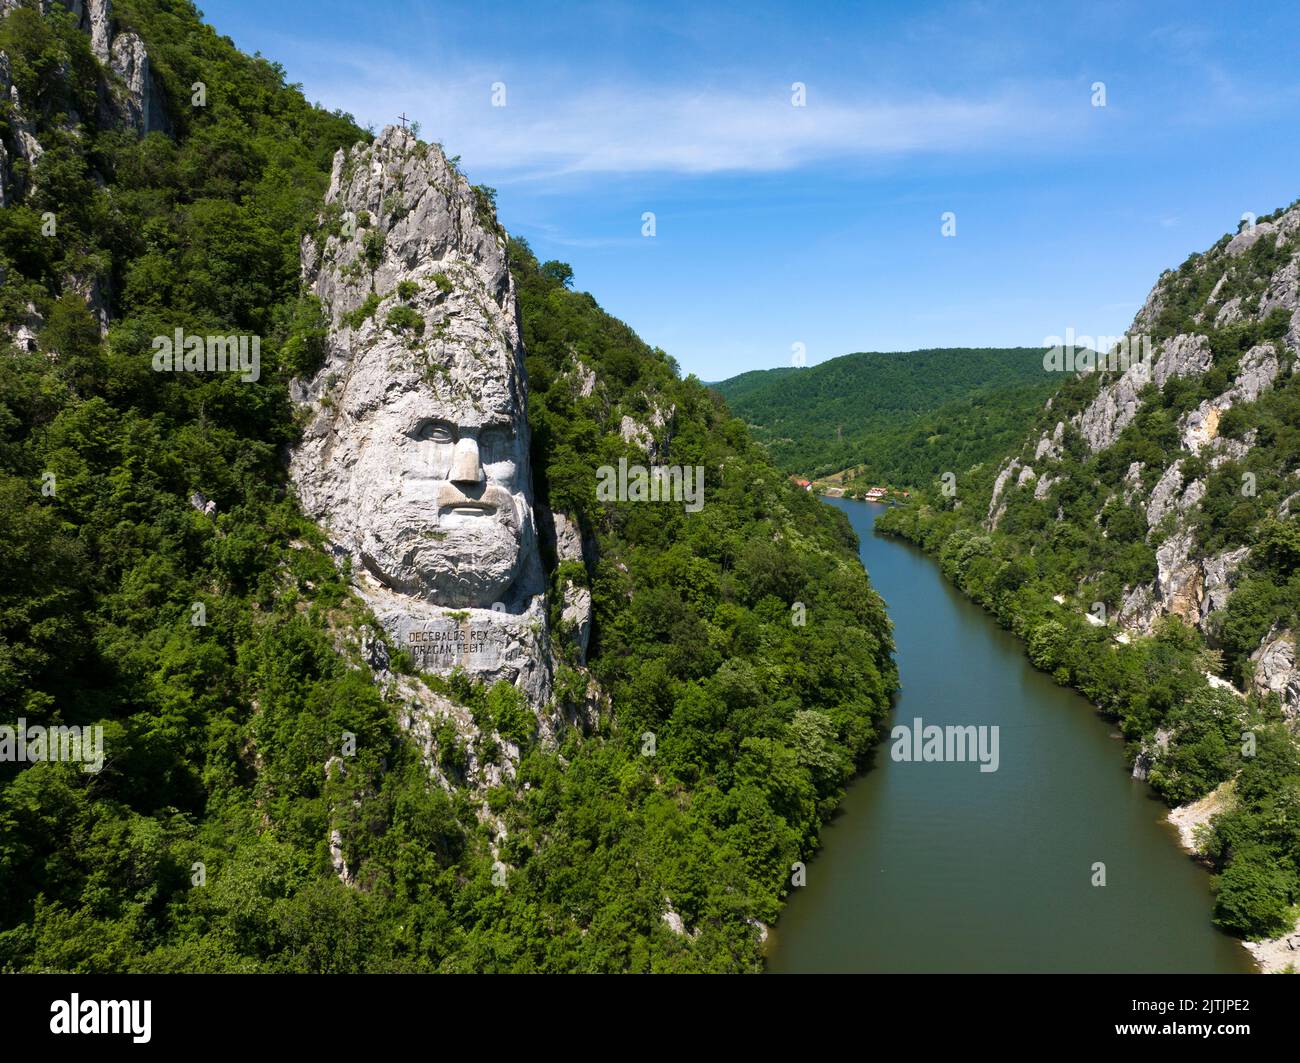 Sculpted Head of Decebal Dacian King, placed on the course of Danube River Stock Photo